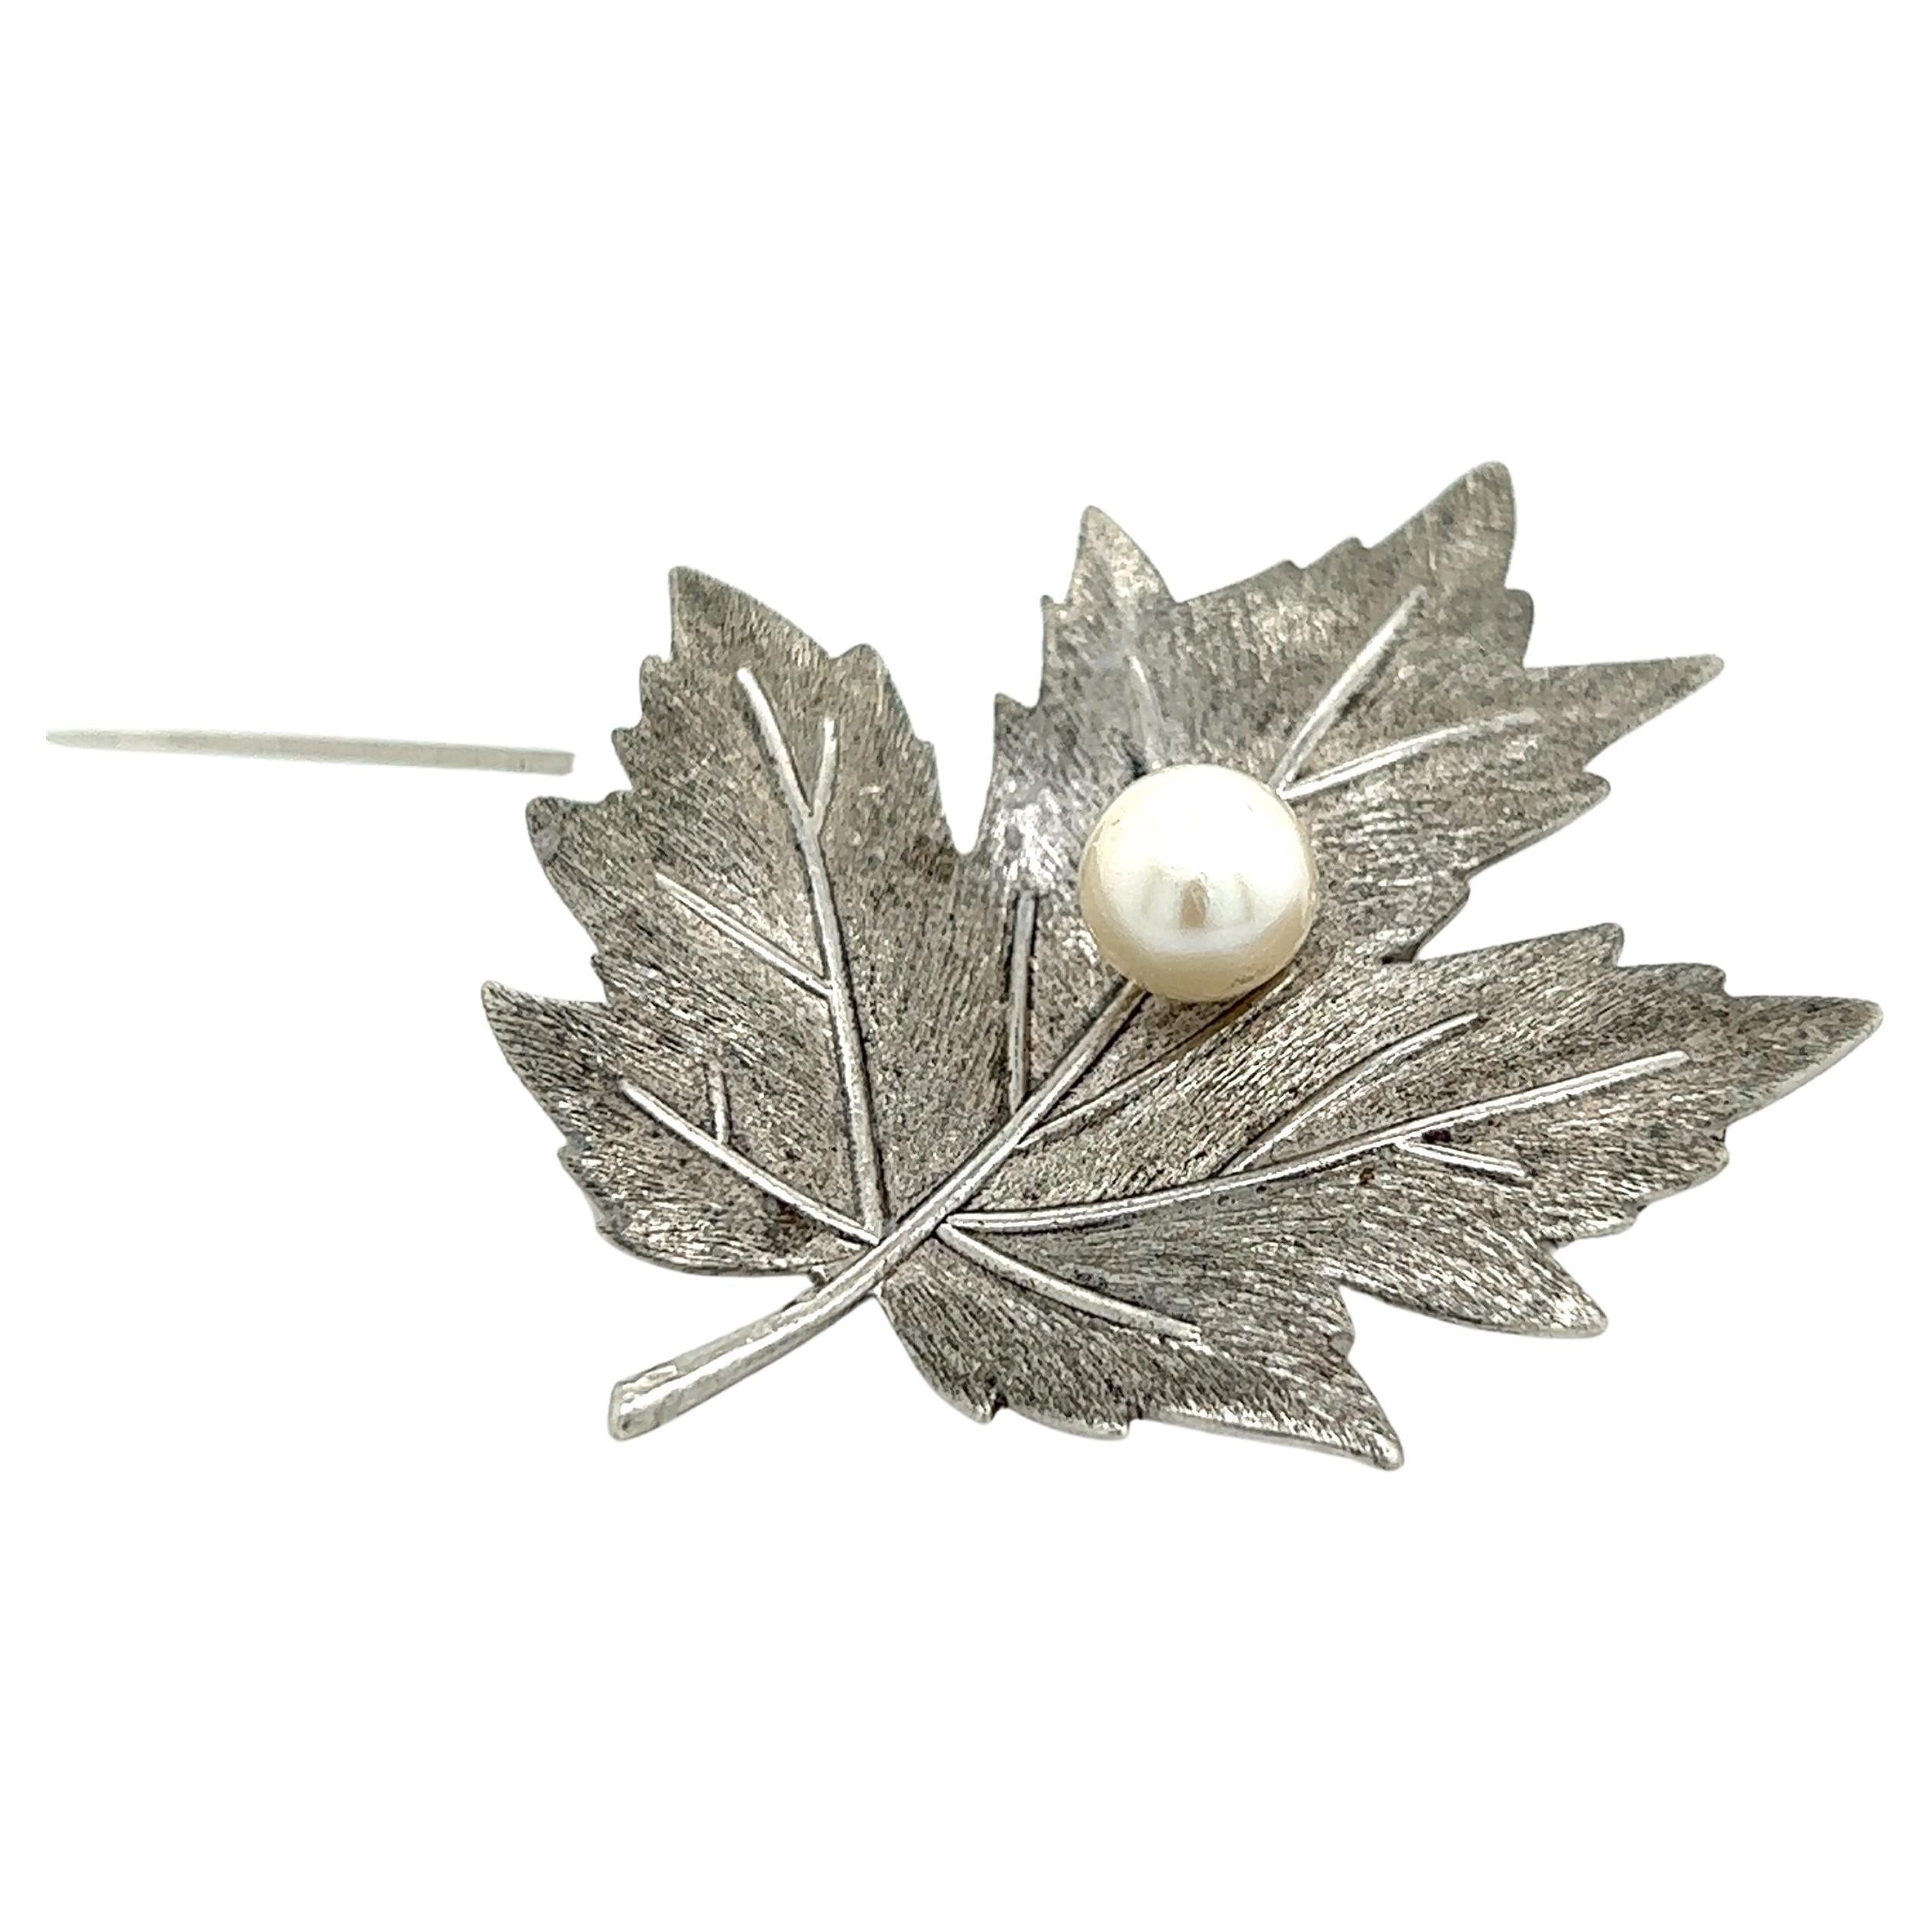 Mikimoto Estate Akoya Pearl Leaf Brooch Pin Sterling Silver 6.65 mm M297

This elegant Authentic Mikimoto Estate Akoya pearl brooch pin is made of sterling silver and has 1 Akoya Cultured Pearls ranging in size from 6.65 mm and a weight of 7.94